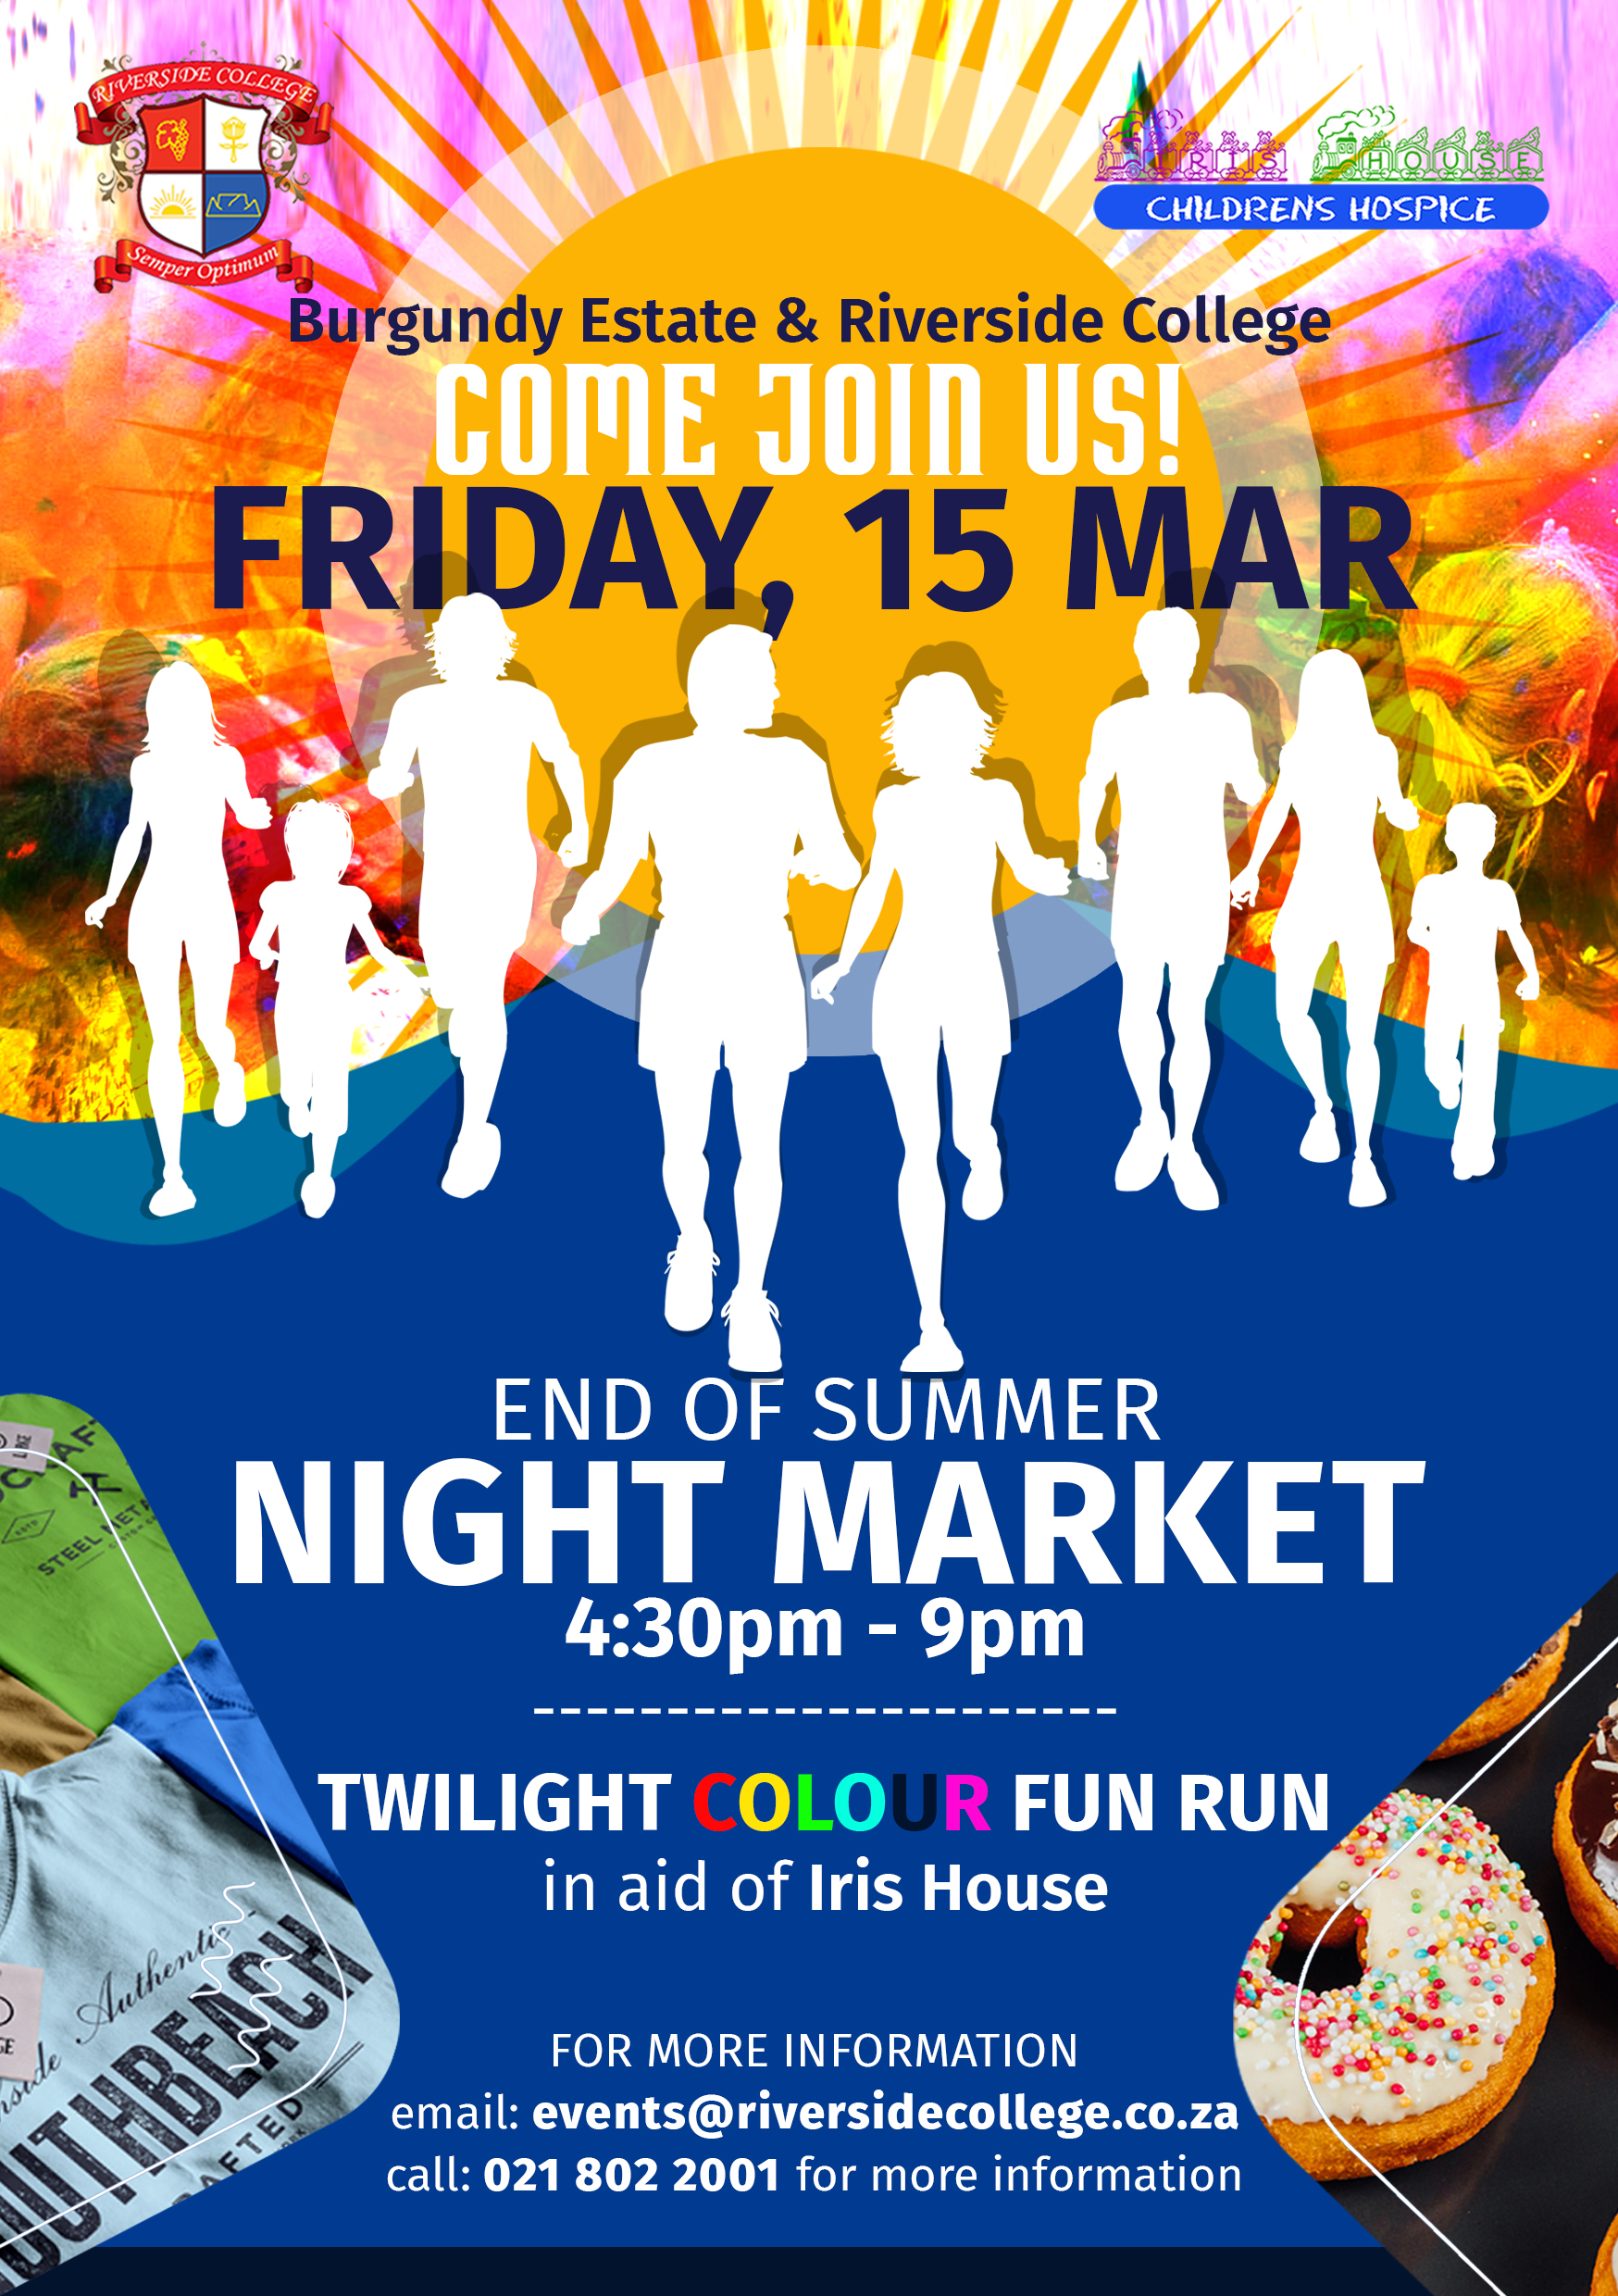 5km TWILIGHT Colour Fun Run on March 15, 2024, In Support of Iris House Children's Hospice 1